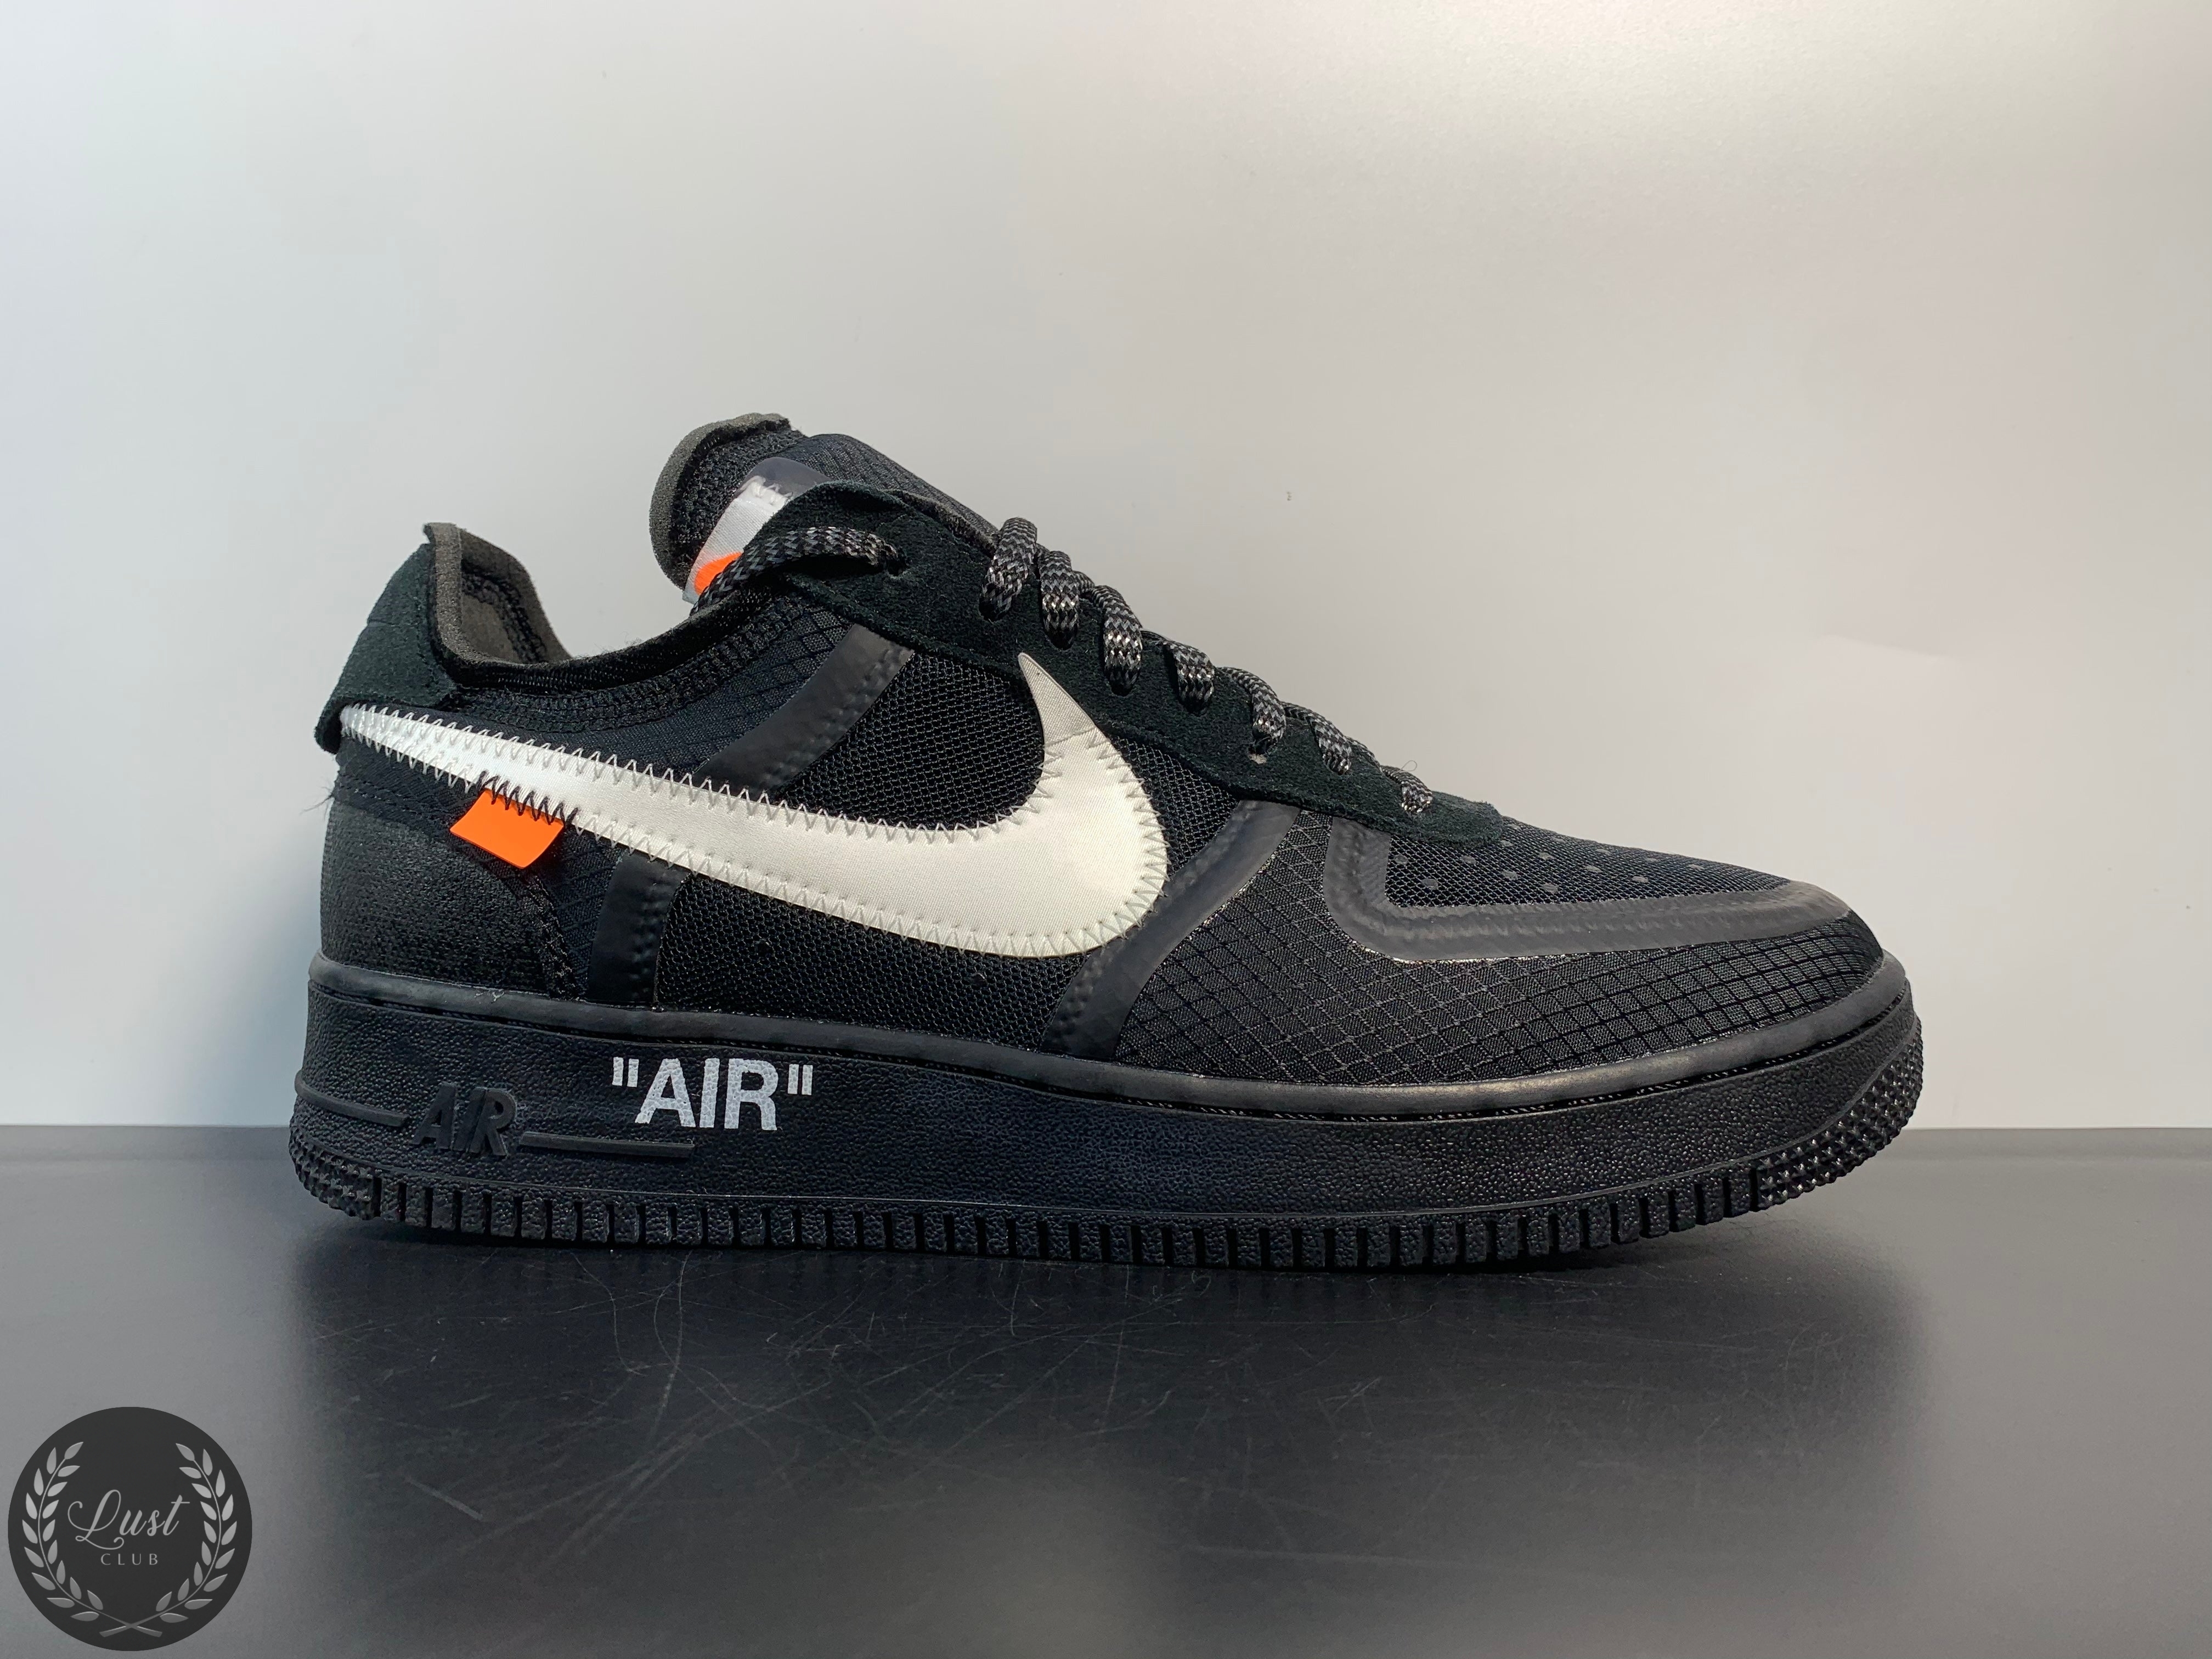 Nike Air force 1 Low Off White Black White